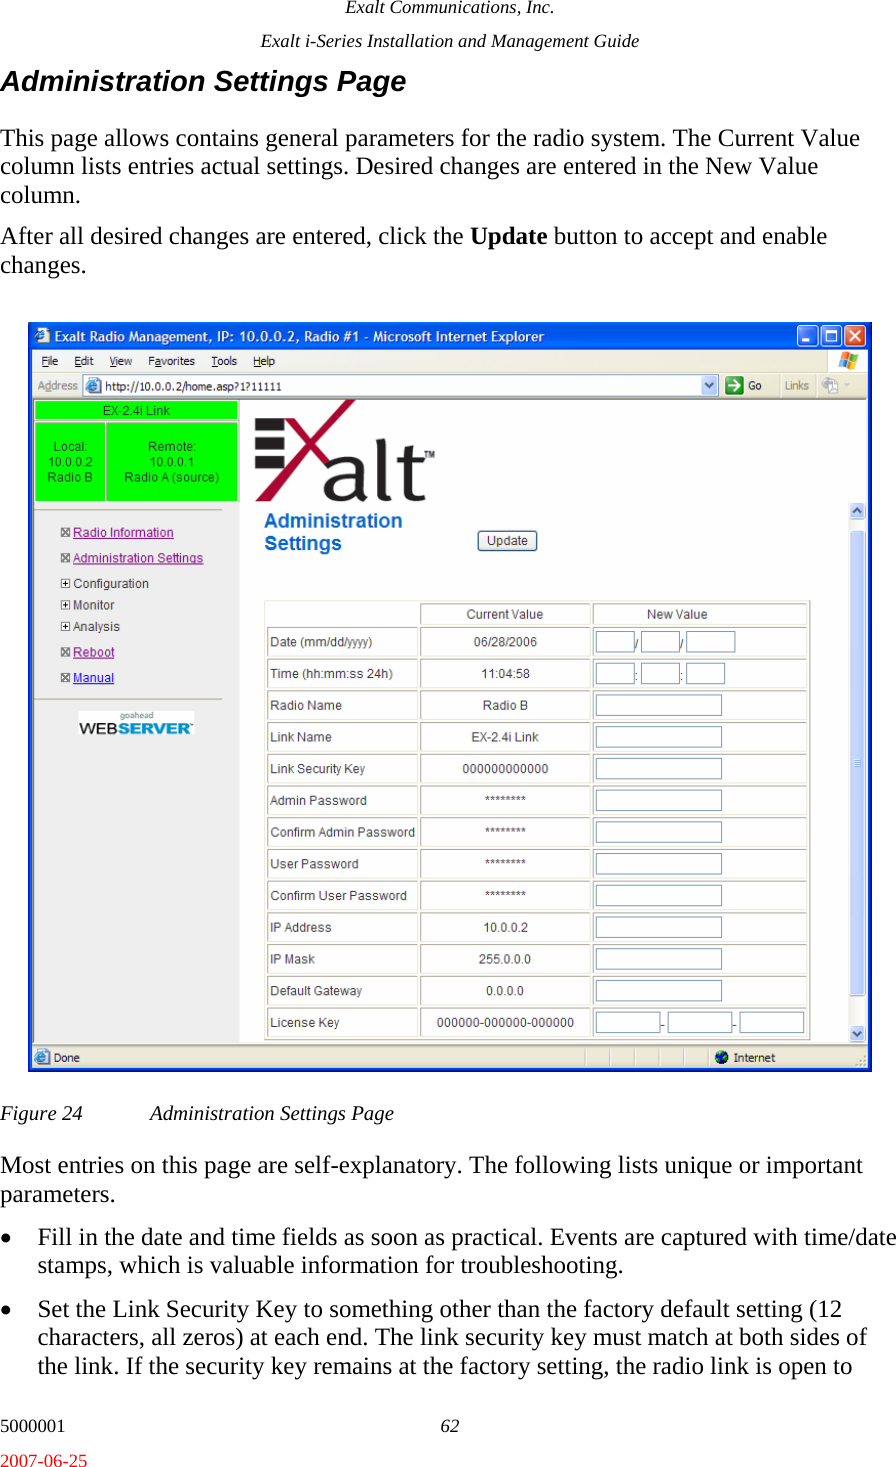 Exalt Communications, Inc. Exalt i-Series Installation and Management Guide 5000001  62 2007-06-25 Administration Settings Page This page allows contains general parameters for the radio system. The Current Value column lists entries actual settings. Desired changes are entered in the New Value column. After all desired changes are entered, click the Update button to accept and enable changes.  Figure 24  Administration Settings Page Most entries on this page are self-explanatory. The following lists unique or important parameters. • Fill in the date and time fields as soon as practical. Events are captured with time/date stamps, which is valuable information for troubleshooting. • Set the Link Security Key to something other than the factory default setting (12 characters, all zeros) at each end. The link security key must match at both sides of the link. If the security key remains at the factory setting, the radio link is open to 